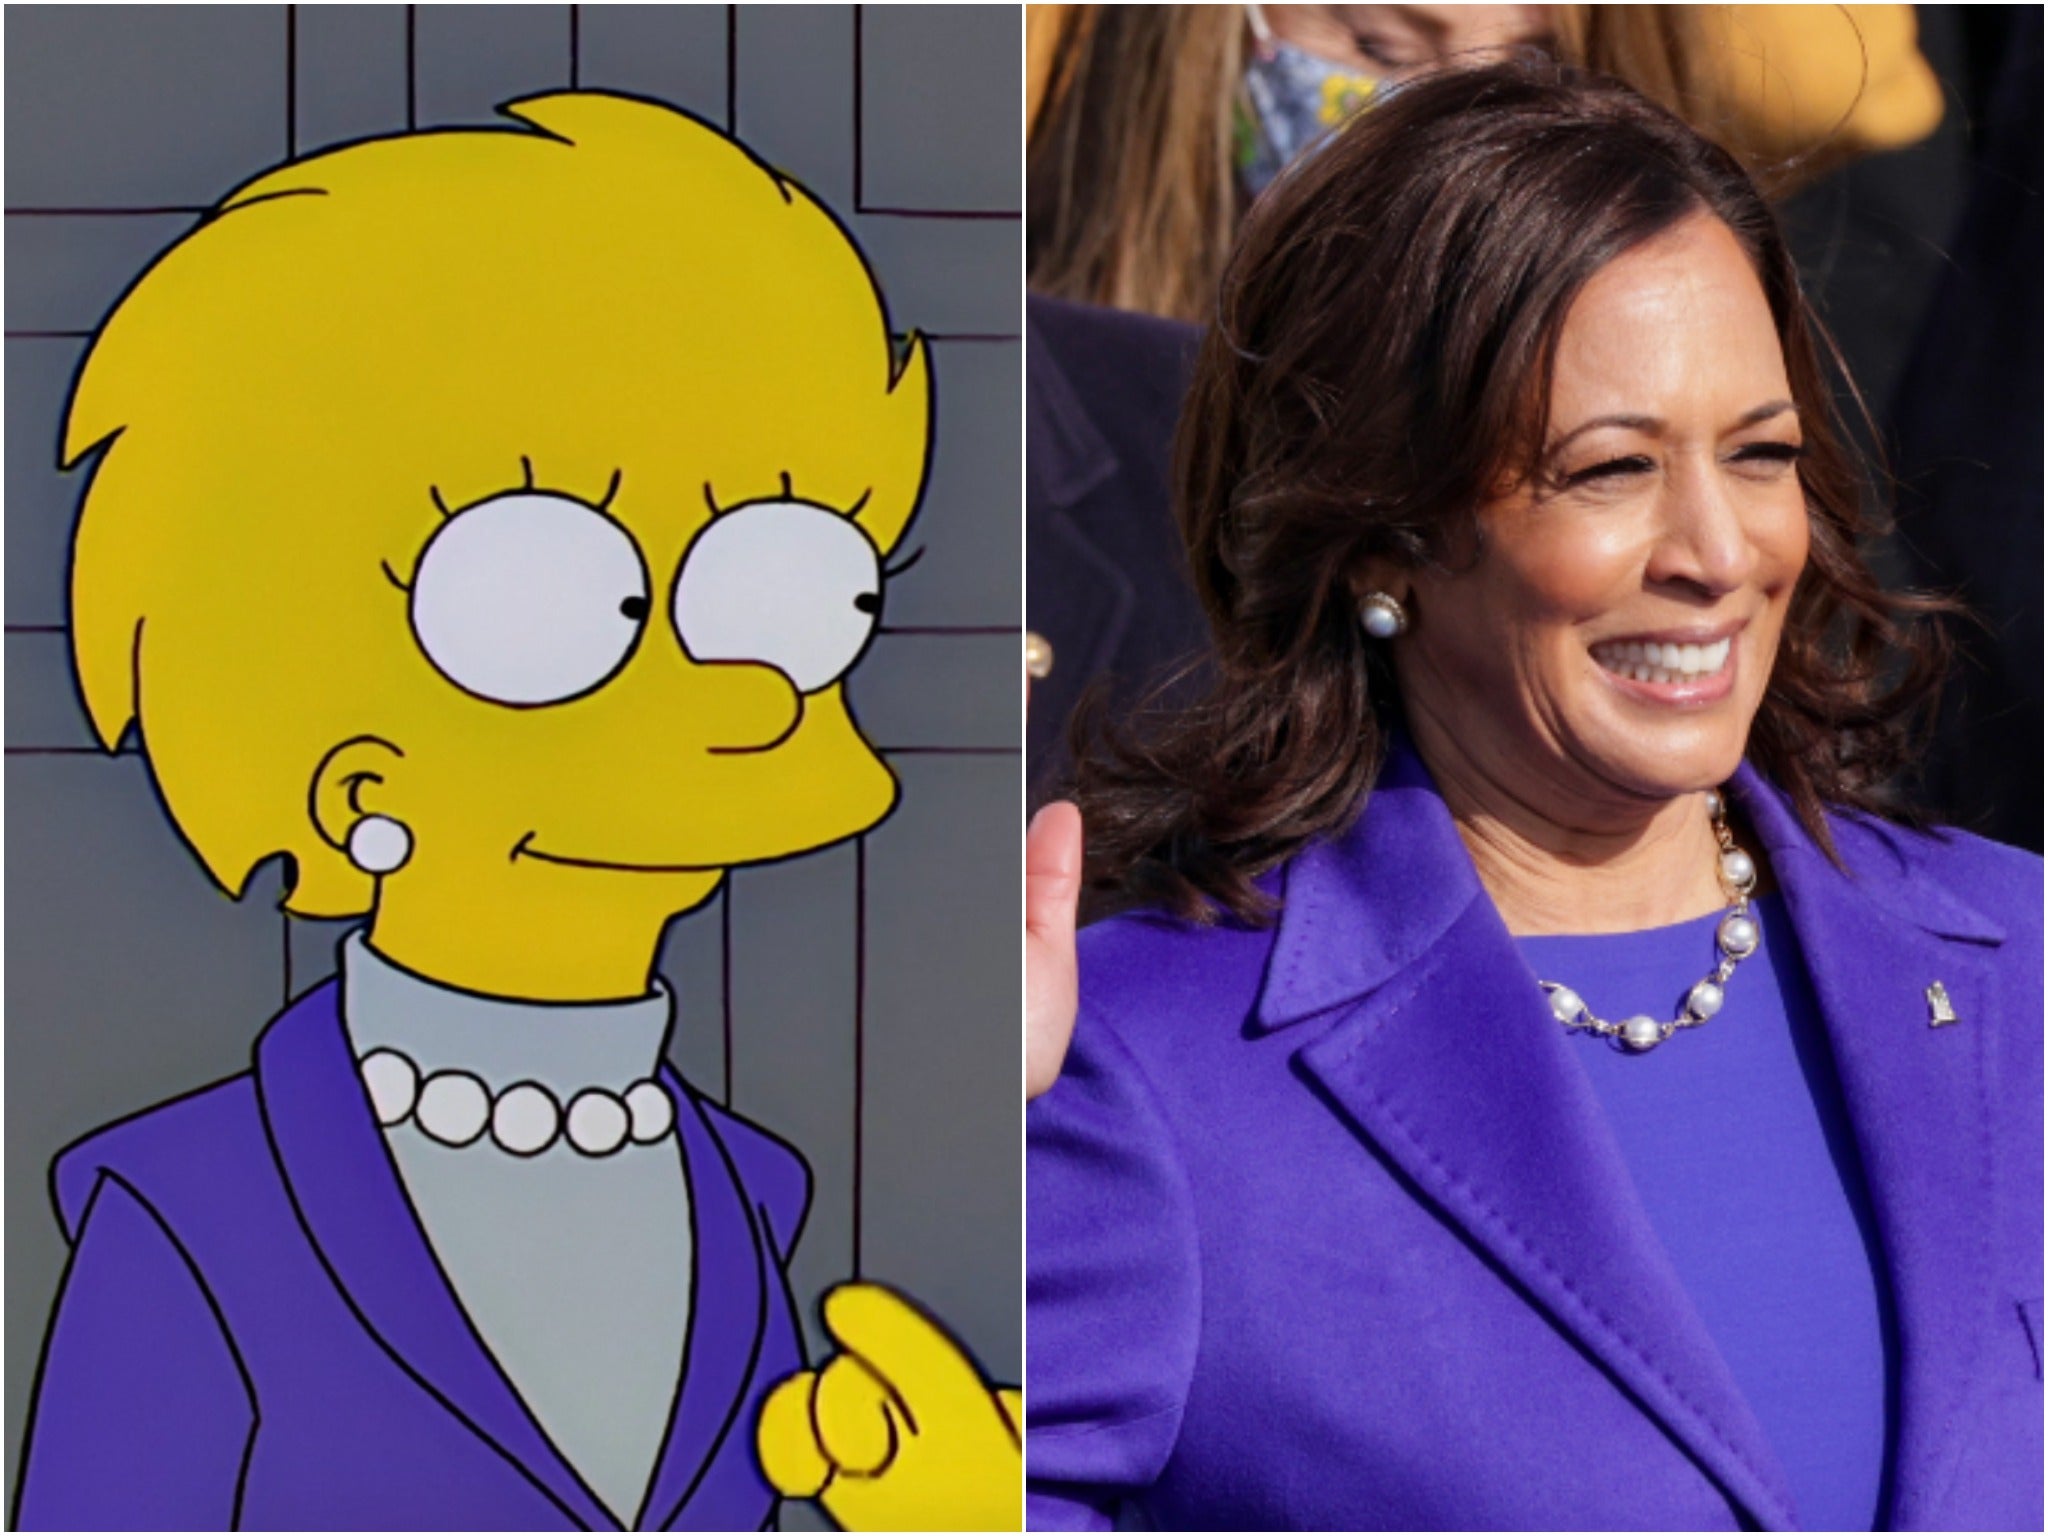 The Simpsons' predicted the rise of Kamala Harris – maybe. So why do  cartoons have such political potency? | The Independent